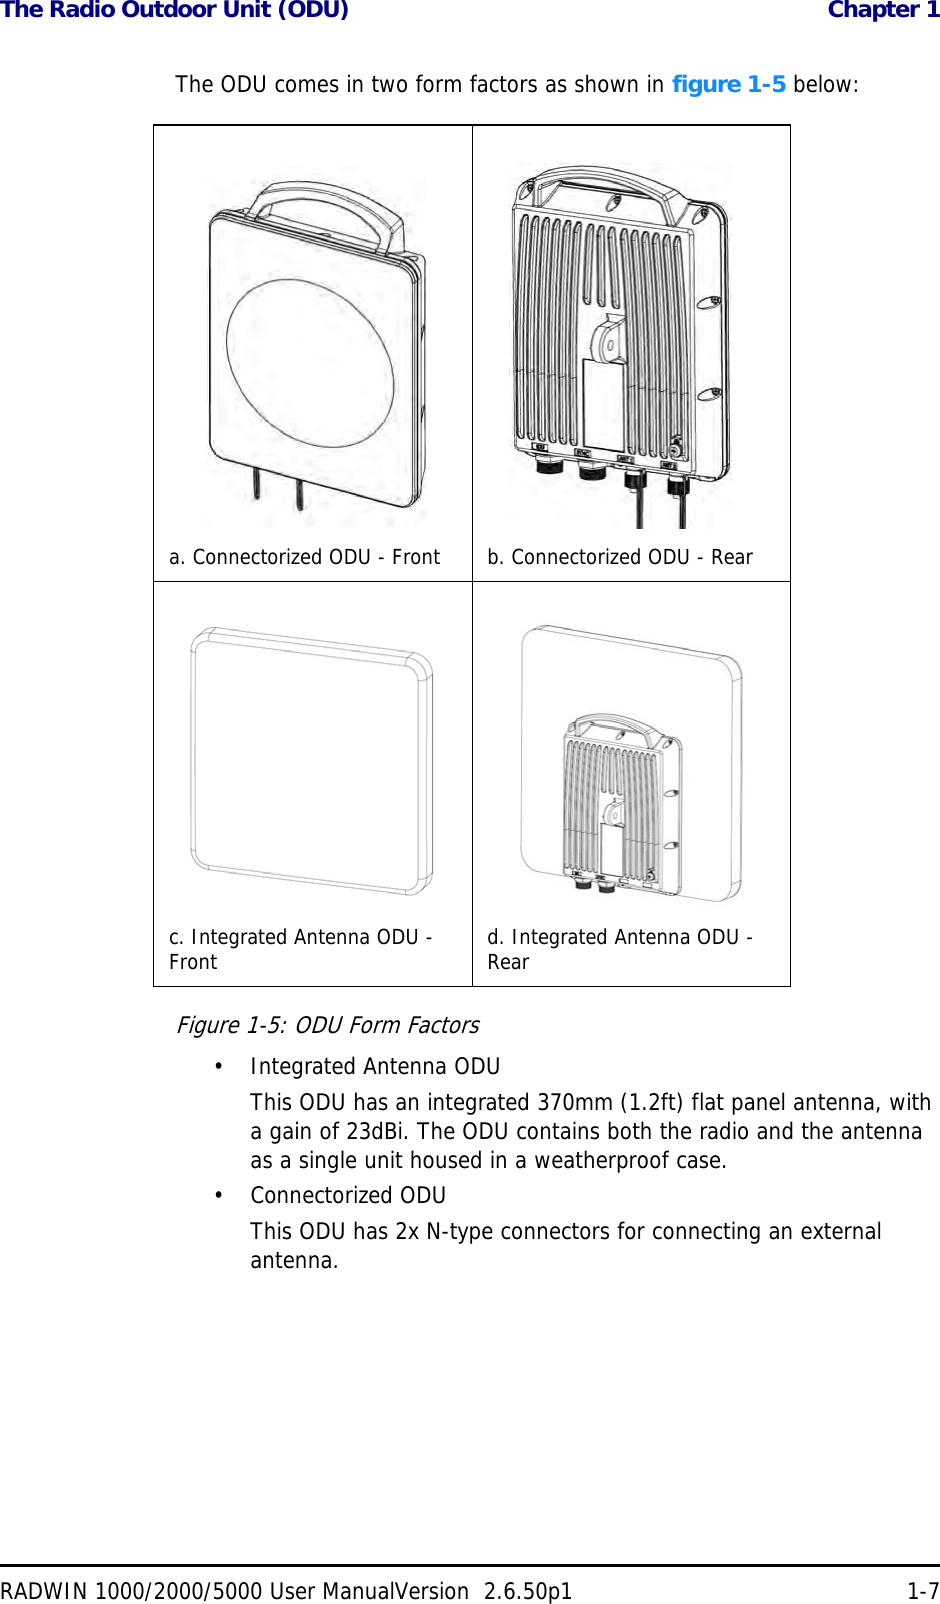 The Radio Outdoor Unit (ODU)  Chapter 1RADWIN 1000/2000/5000 User ManualVersion  2.6.50p1 1-7The ODU comes in two form factors as shown in figure 1-5 below:Figure 1-5: ODU Form Factors• Integrated Antenna ODUThis ODU has an integrated 370mm (1.2ft) flat panel antenna, with a gain of 23dBi. The ODU contains both the radio and the antenna as a single unit housed in a weatherproof case.•Connectorized ODUThis ODU has 2x N-type connectors for connecting an external antenna.a. Connectorized ODU - Front b. Connectorized ODU - Rearc. Integrated Antenna ODU - Front d. Integrated Antenna ODU - Rear